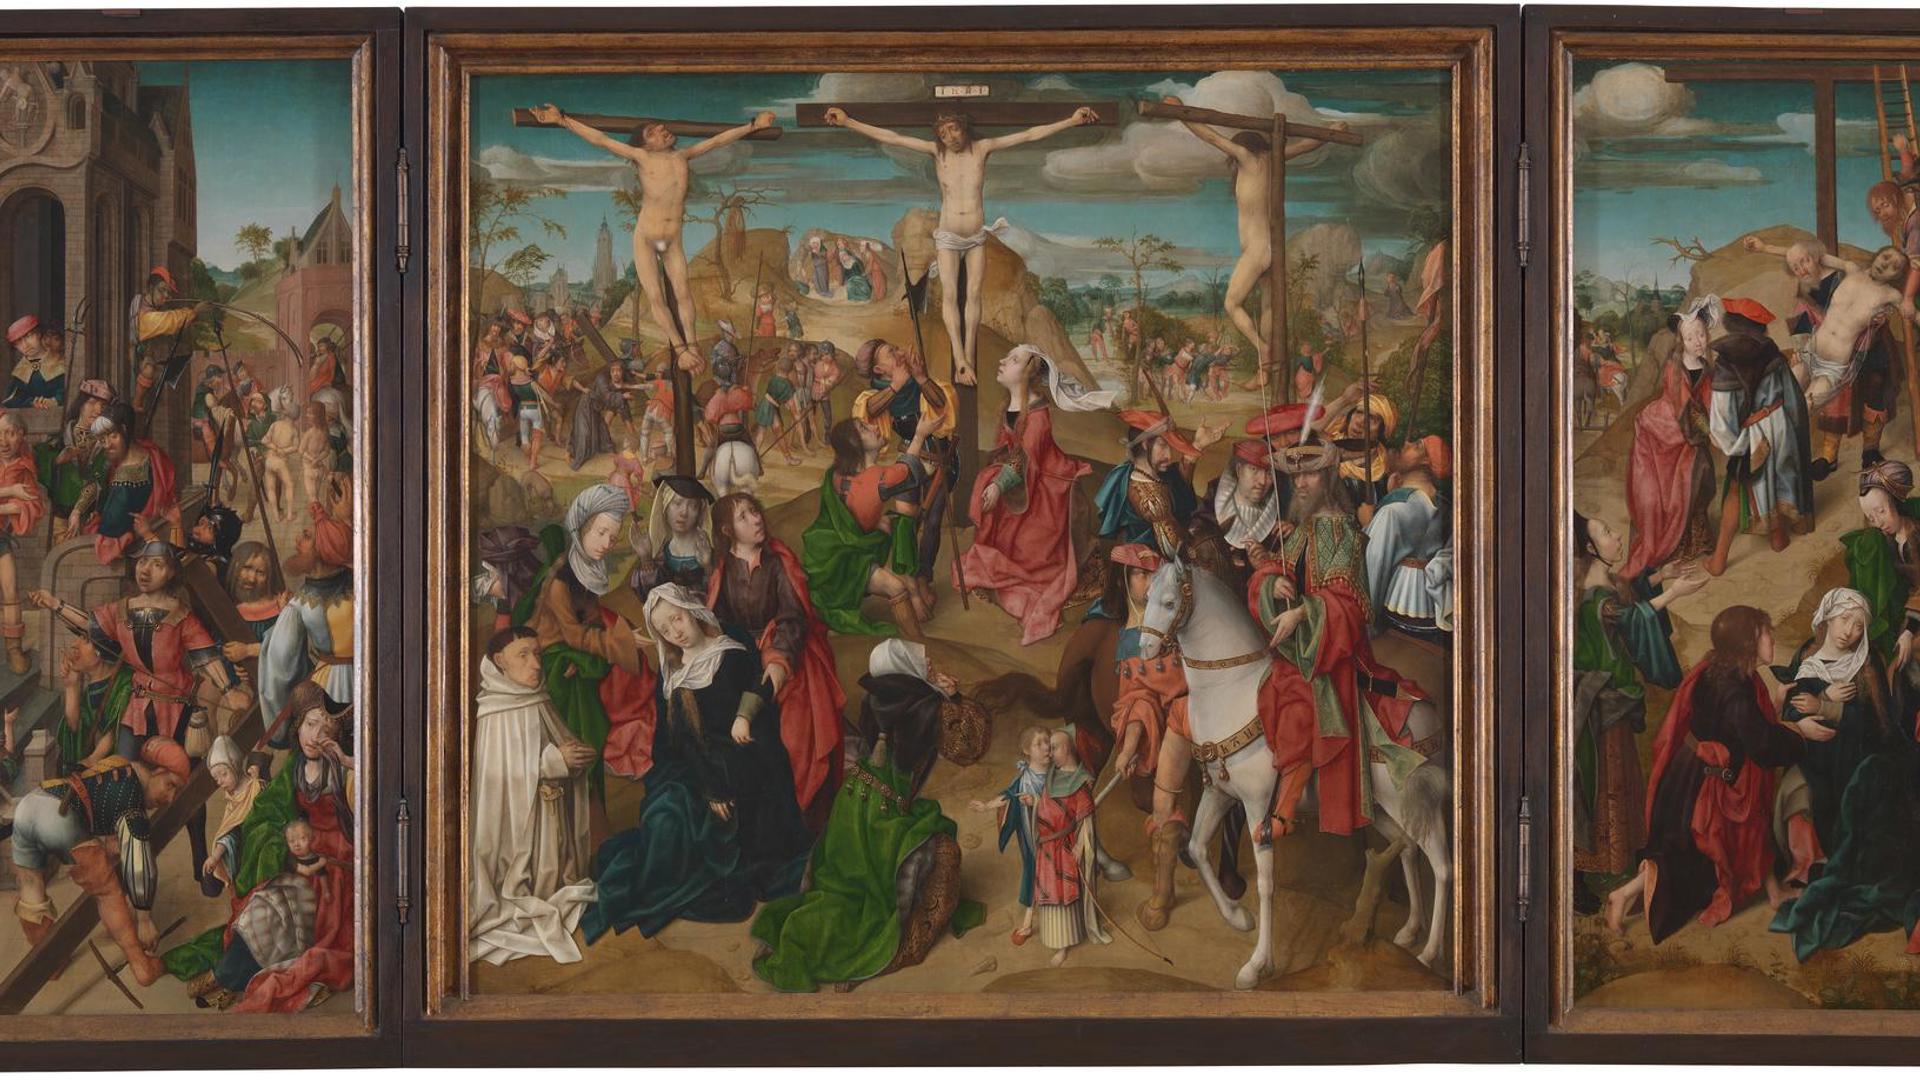 Triptych: Scenes from the Passion of Christ by Master of Delft